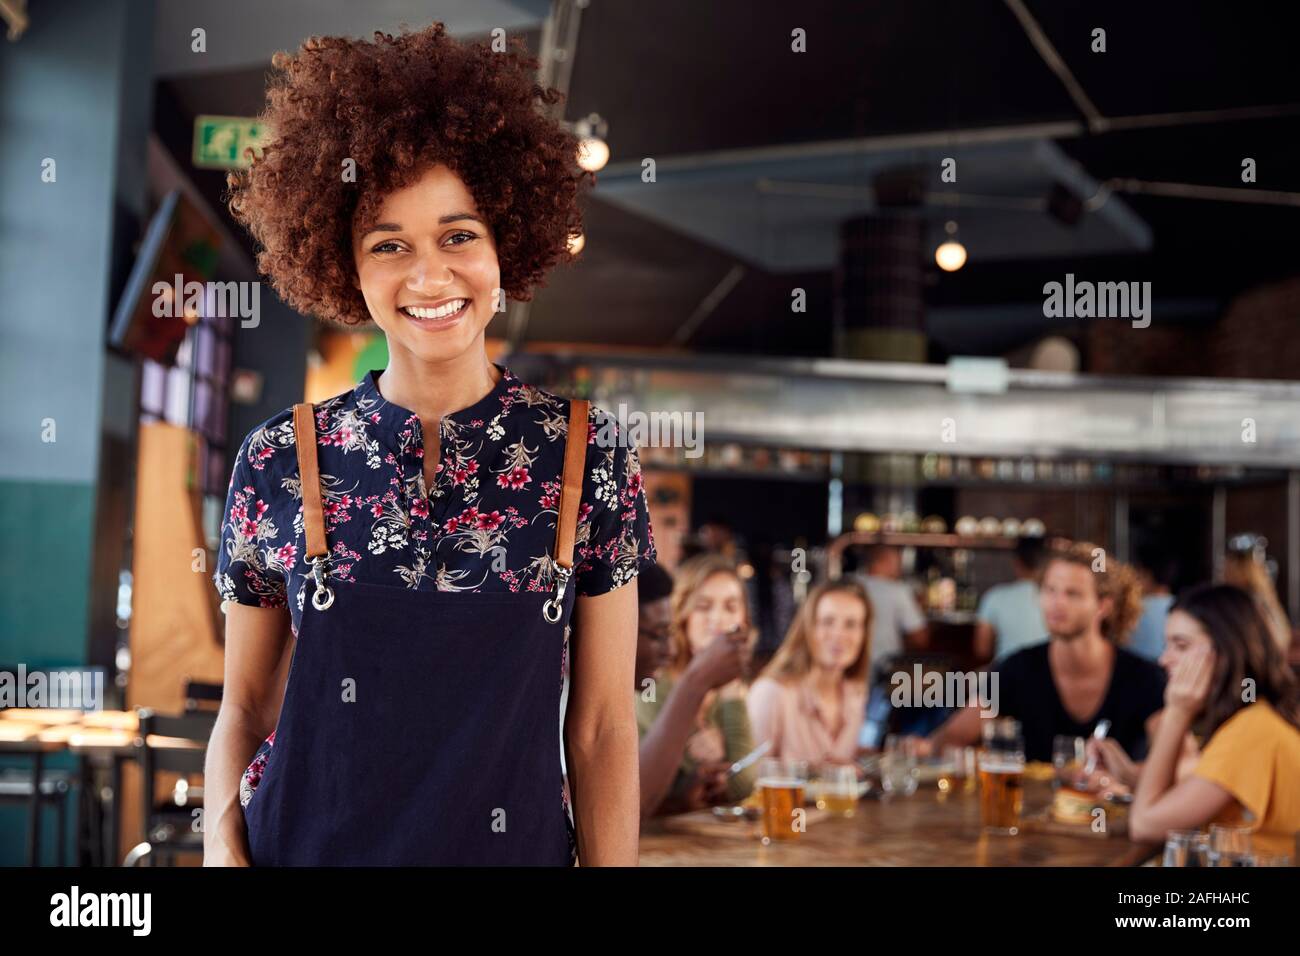 Portrait Of Waitress Serving In Busy Bar Restaurant Stock Photo